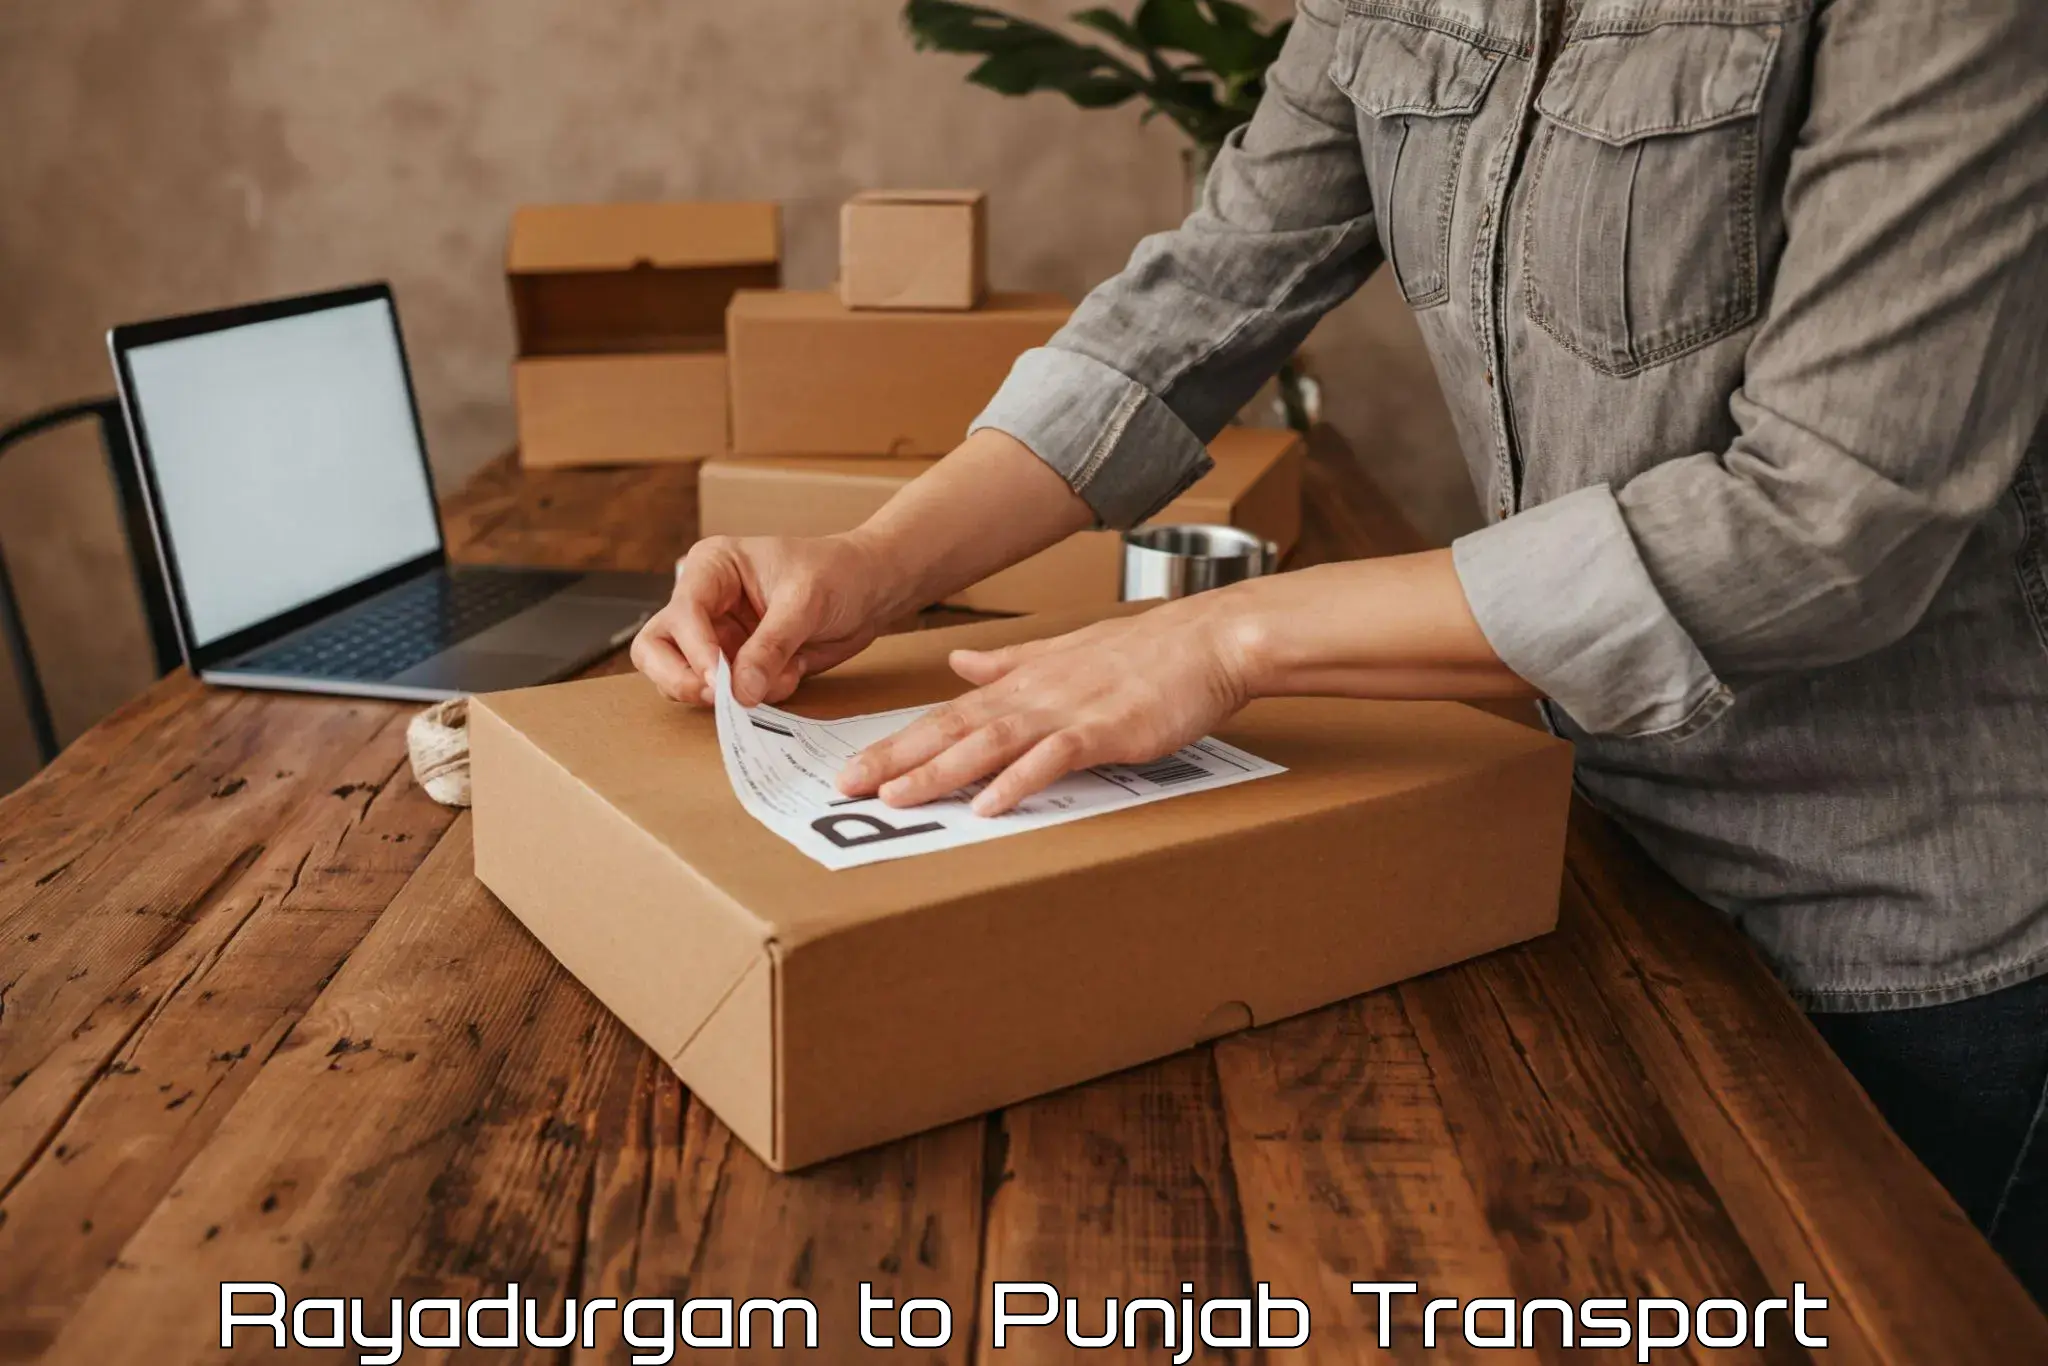 Delivery service Rayadurgam to Firozpur